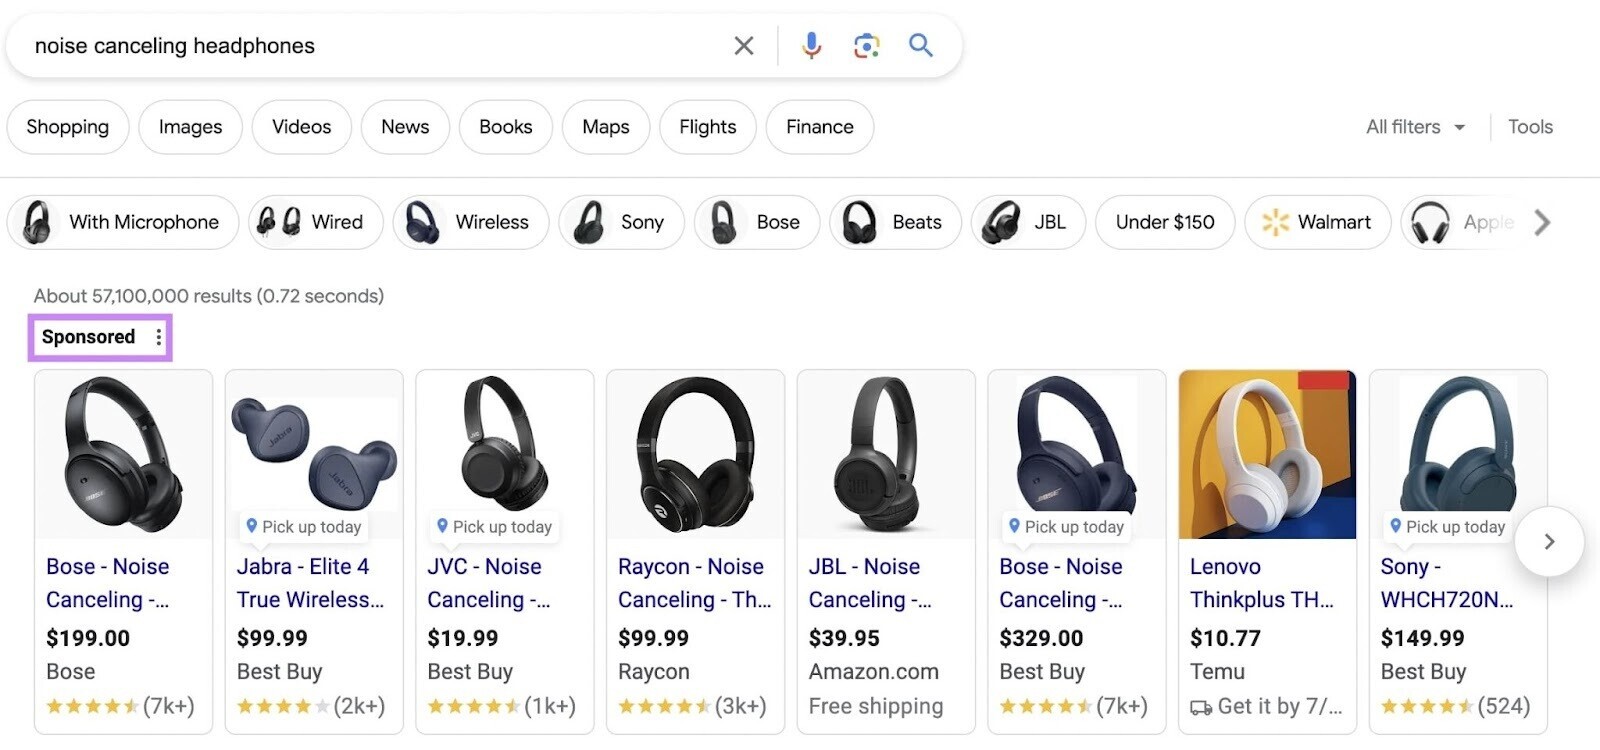 an example of PLAs for headphones showing in Google for "noise cancelling headphones" search